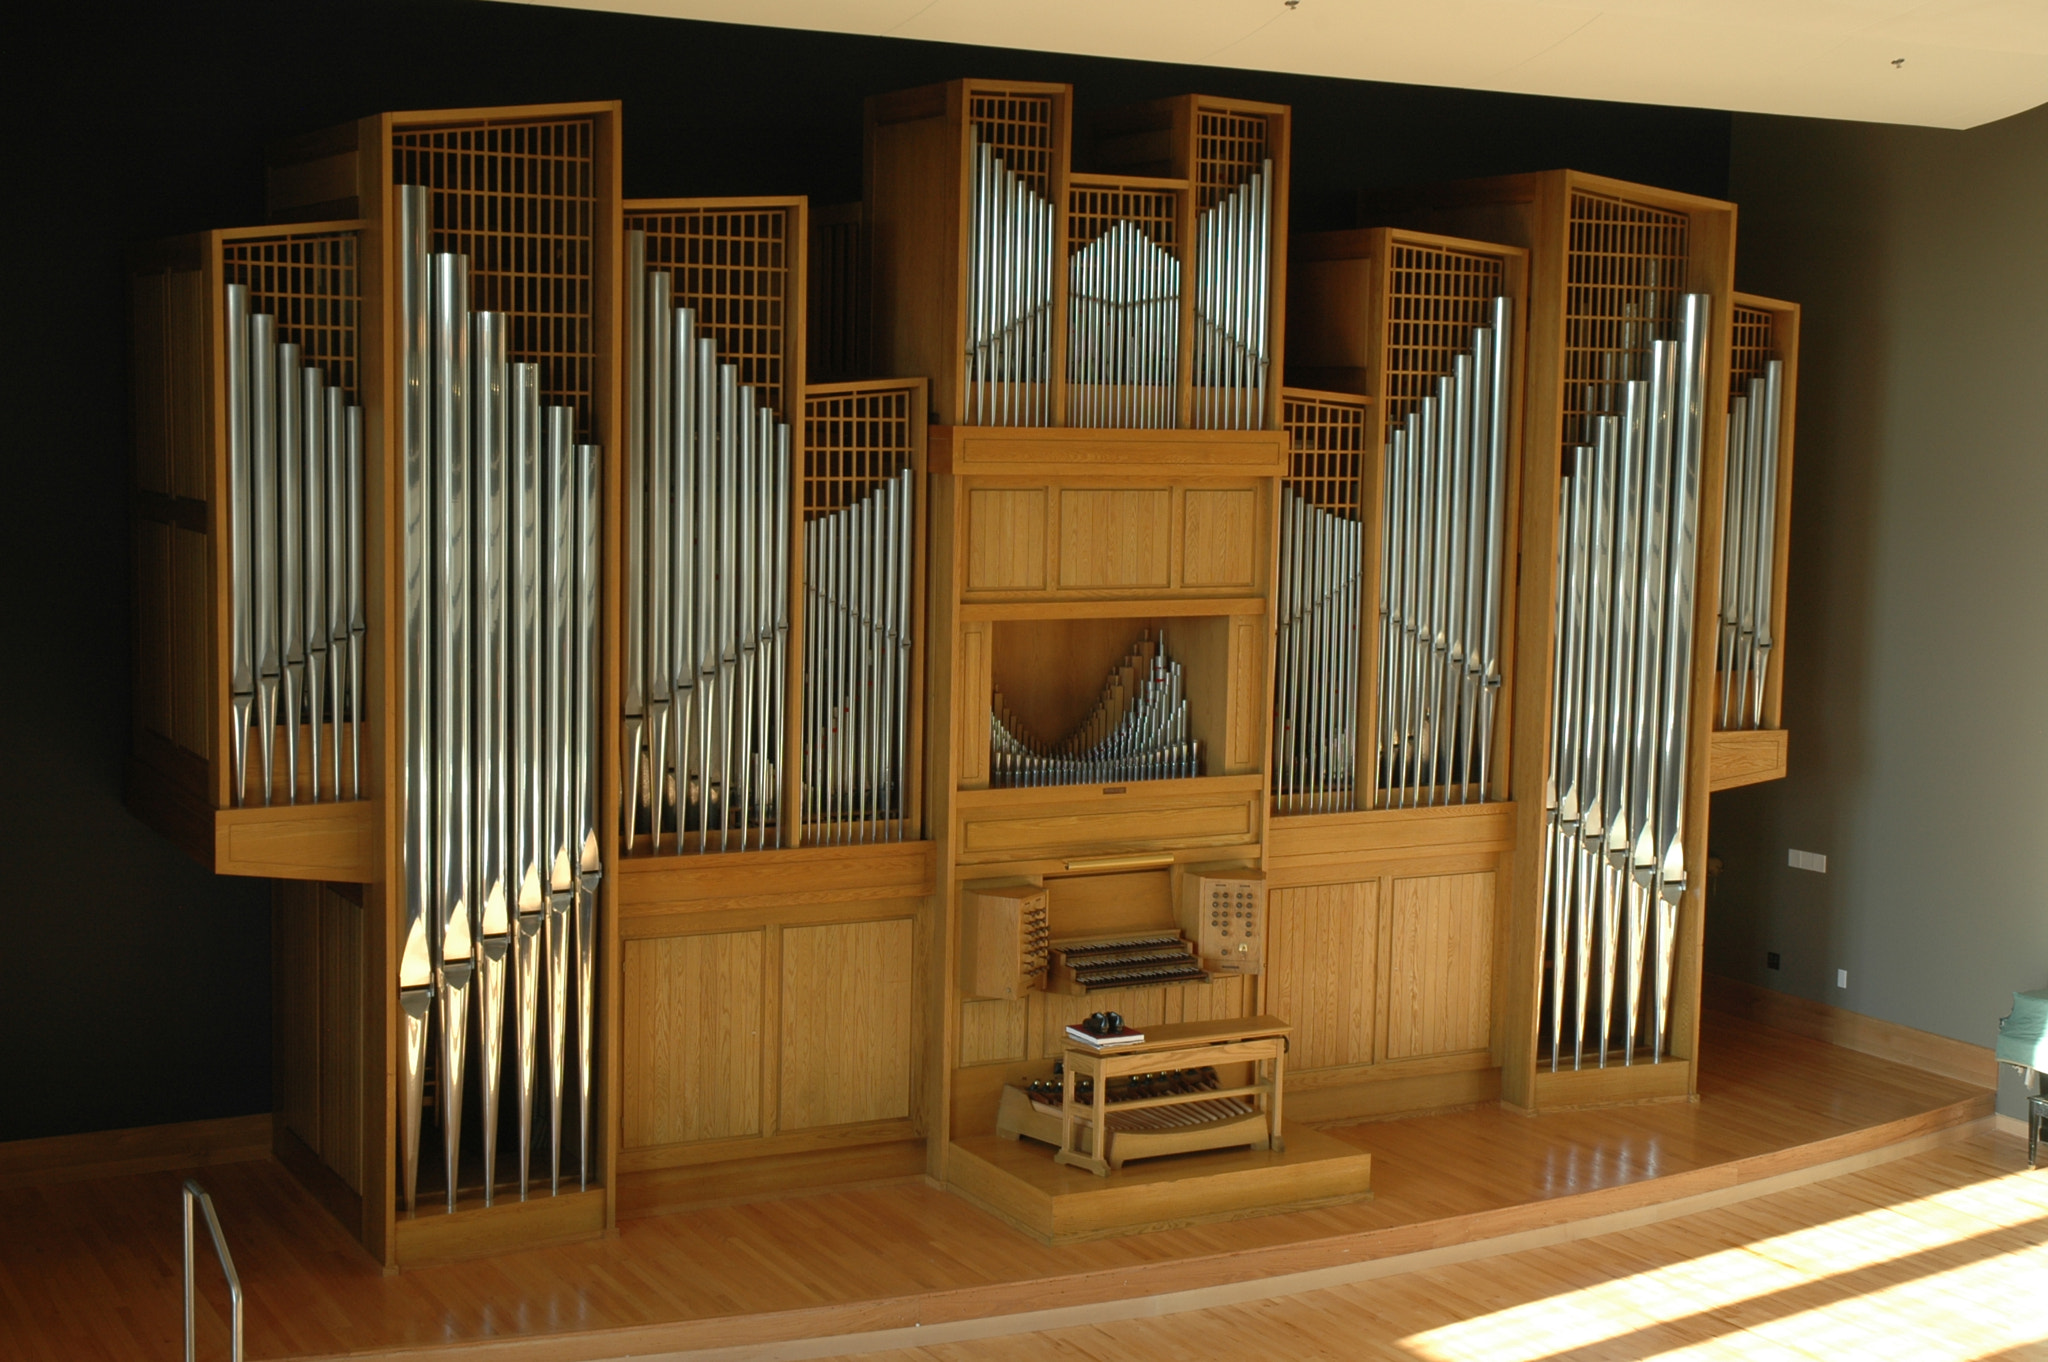 Nikon D70 sample photo. Colorado state university: 1968 casavant organ, relocated to the (in 2008) new university center... photography